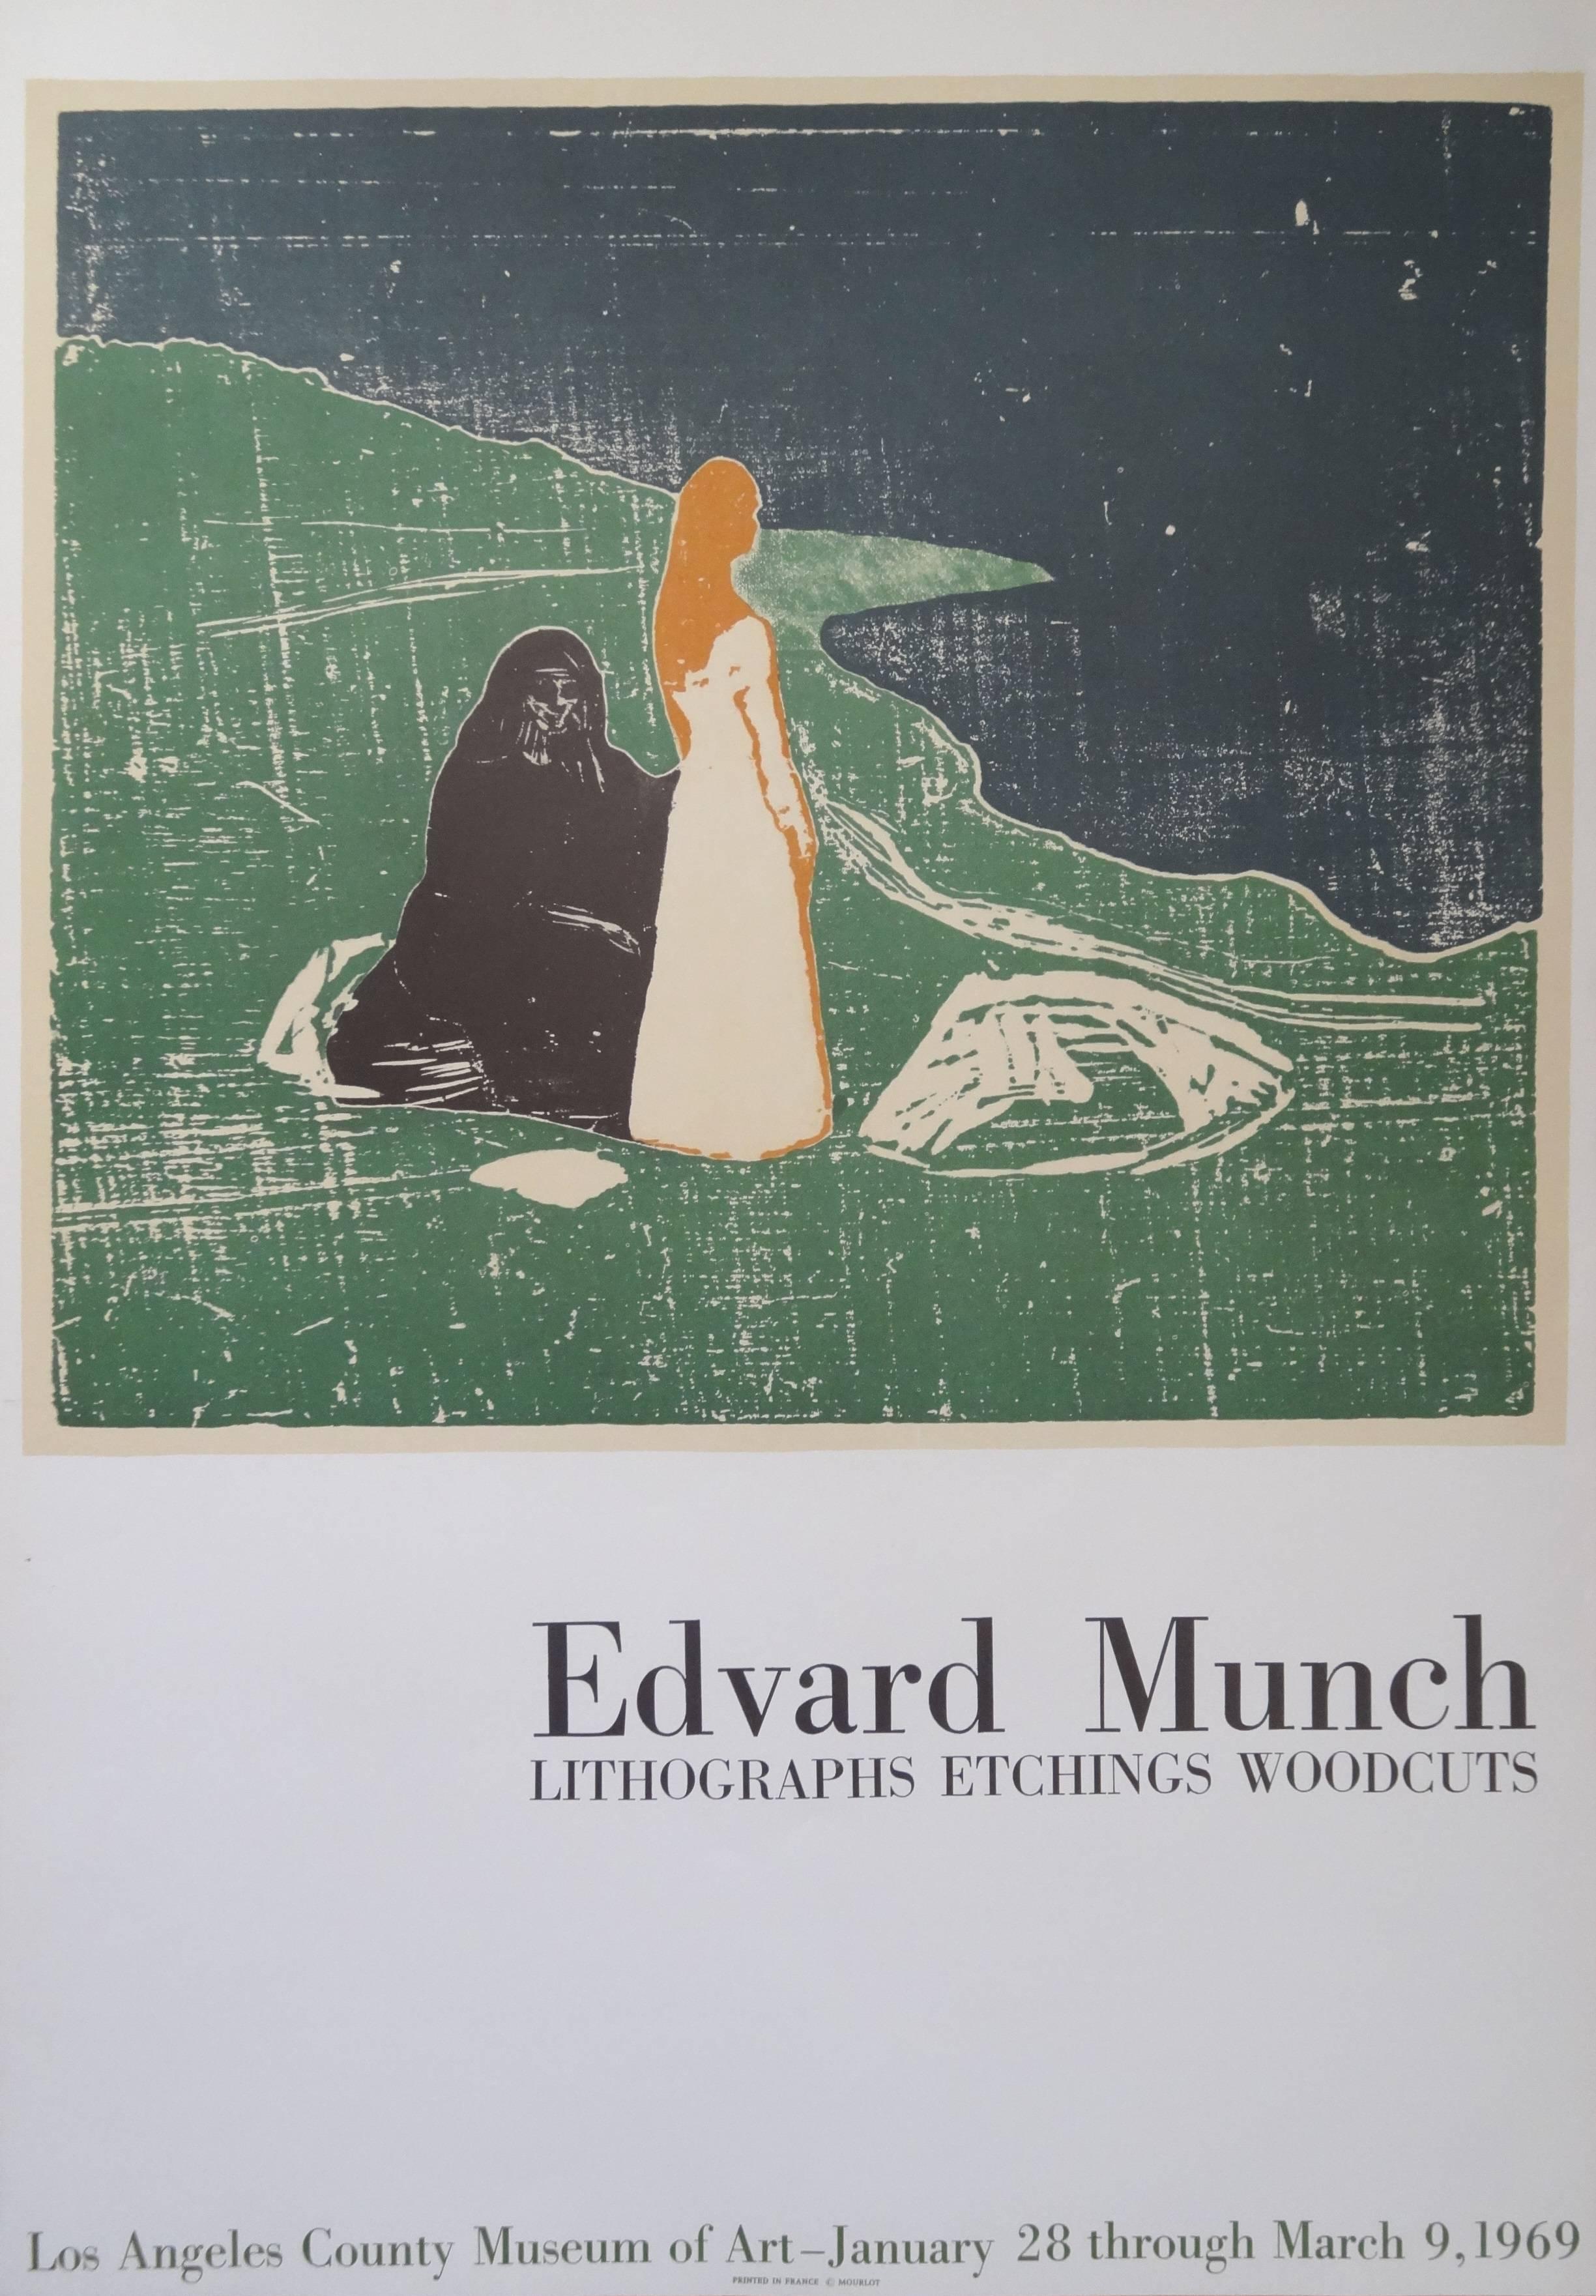 (After) Edvard Munch Figurative Print - Edvard Munch: Lithographs, Etchings, Woodcuts - Los Angeles County Museum